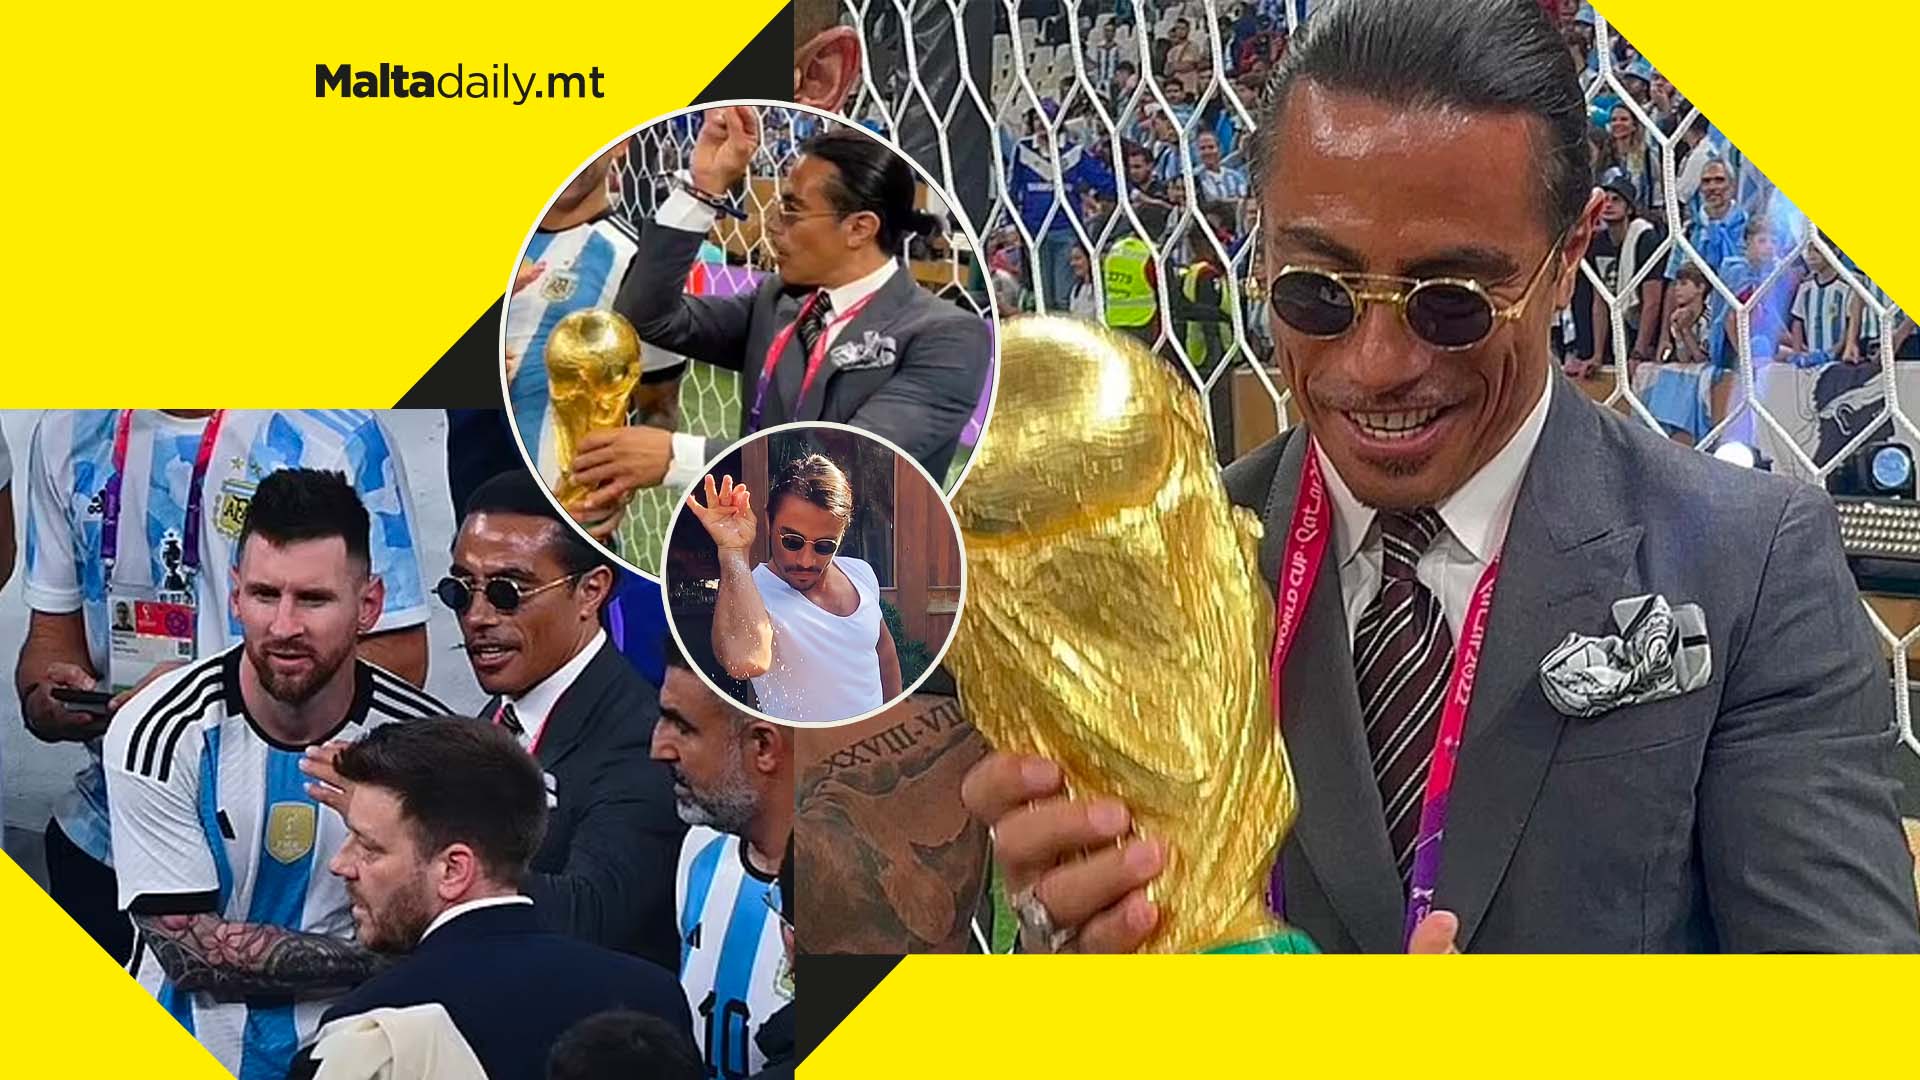 Celebrity chef Salt Bae broke FIFA rules by holding World Cup